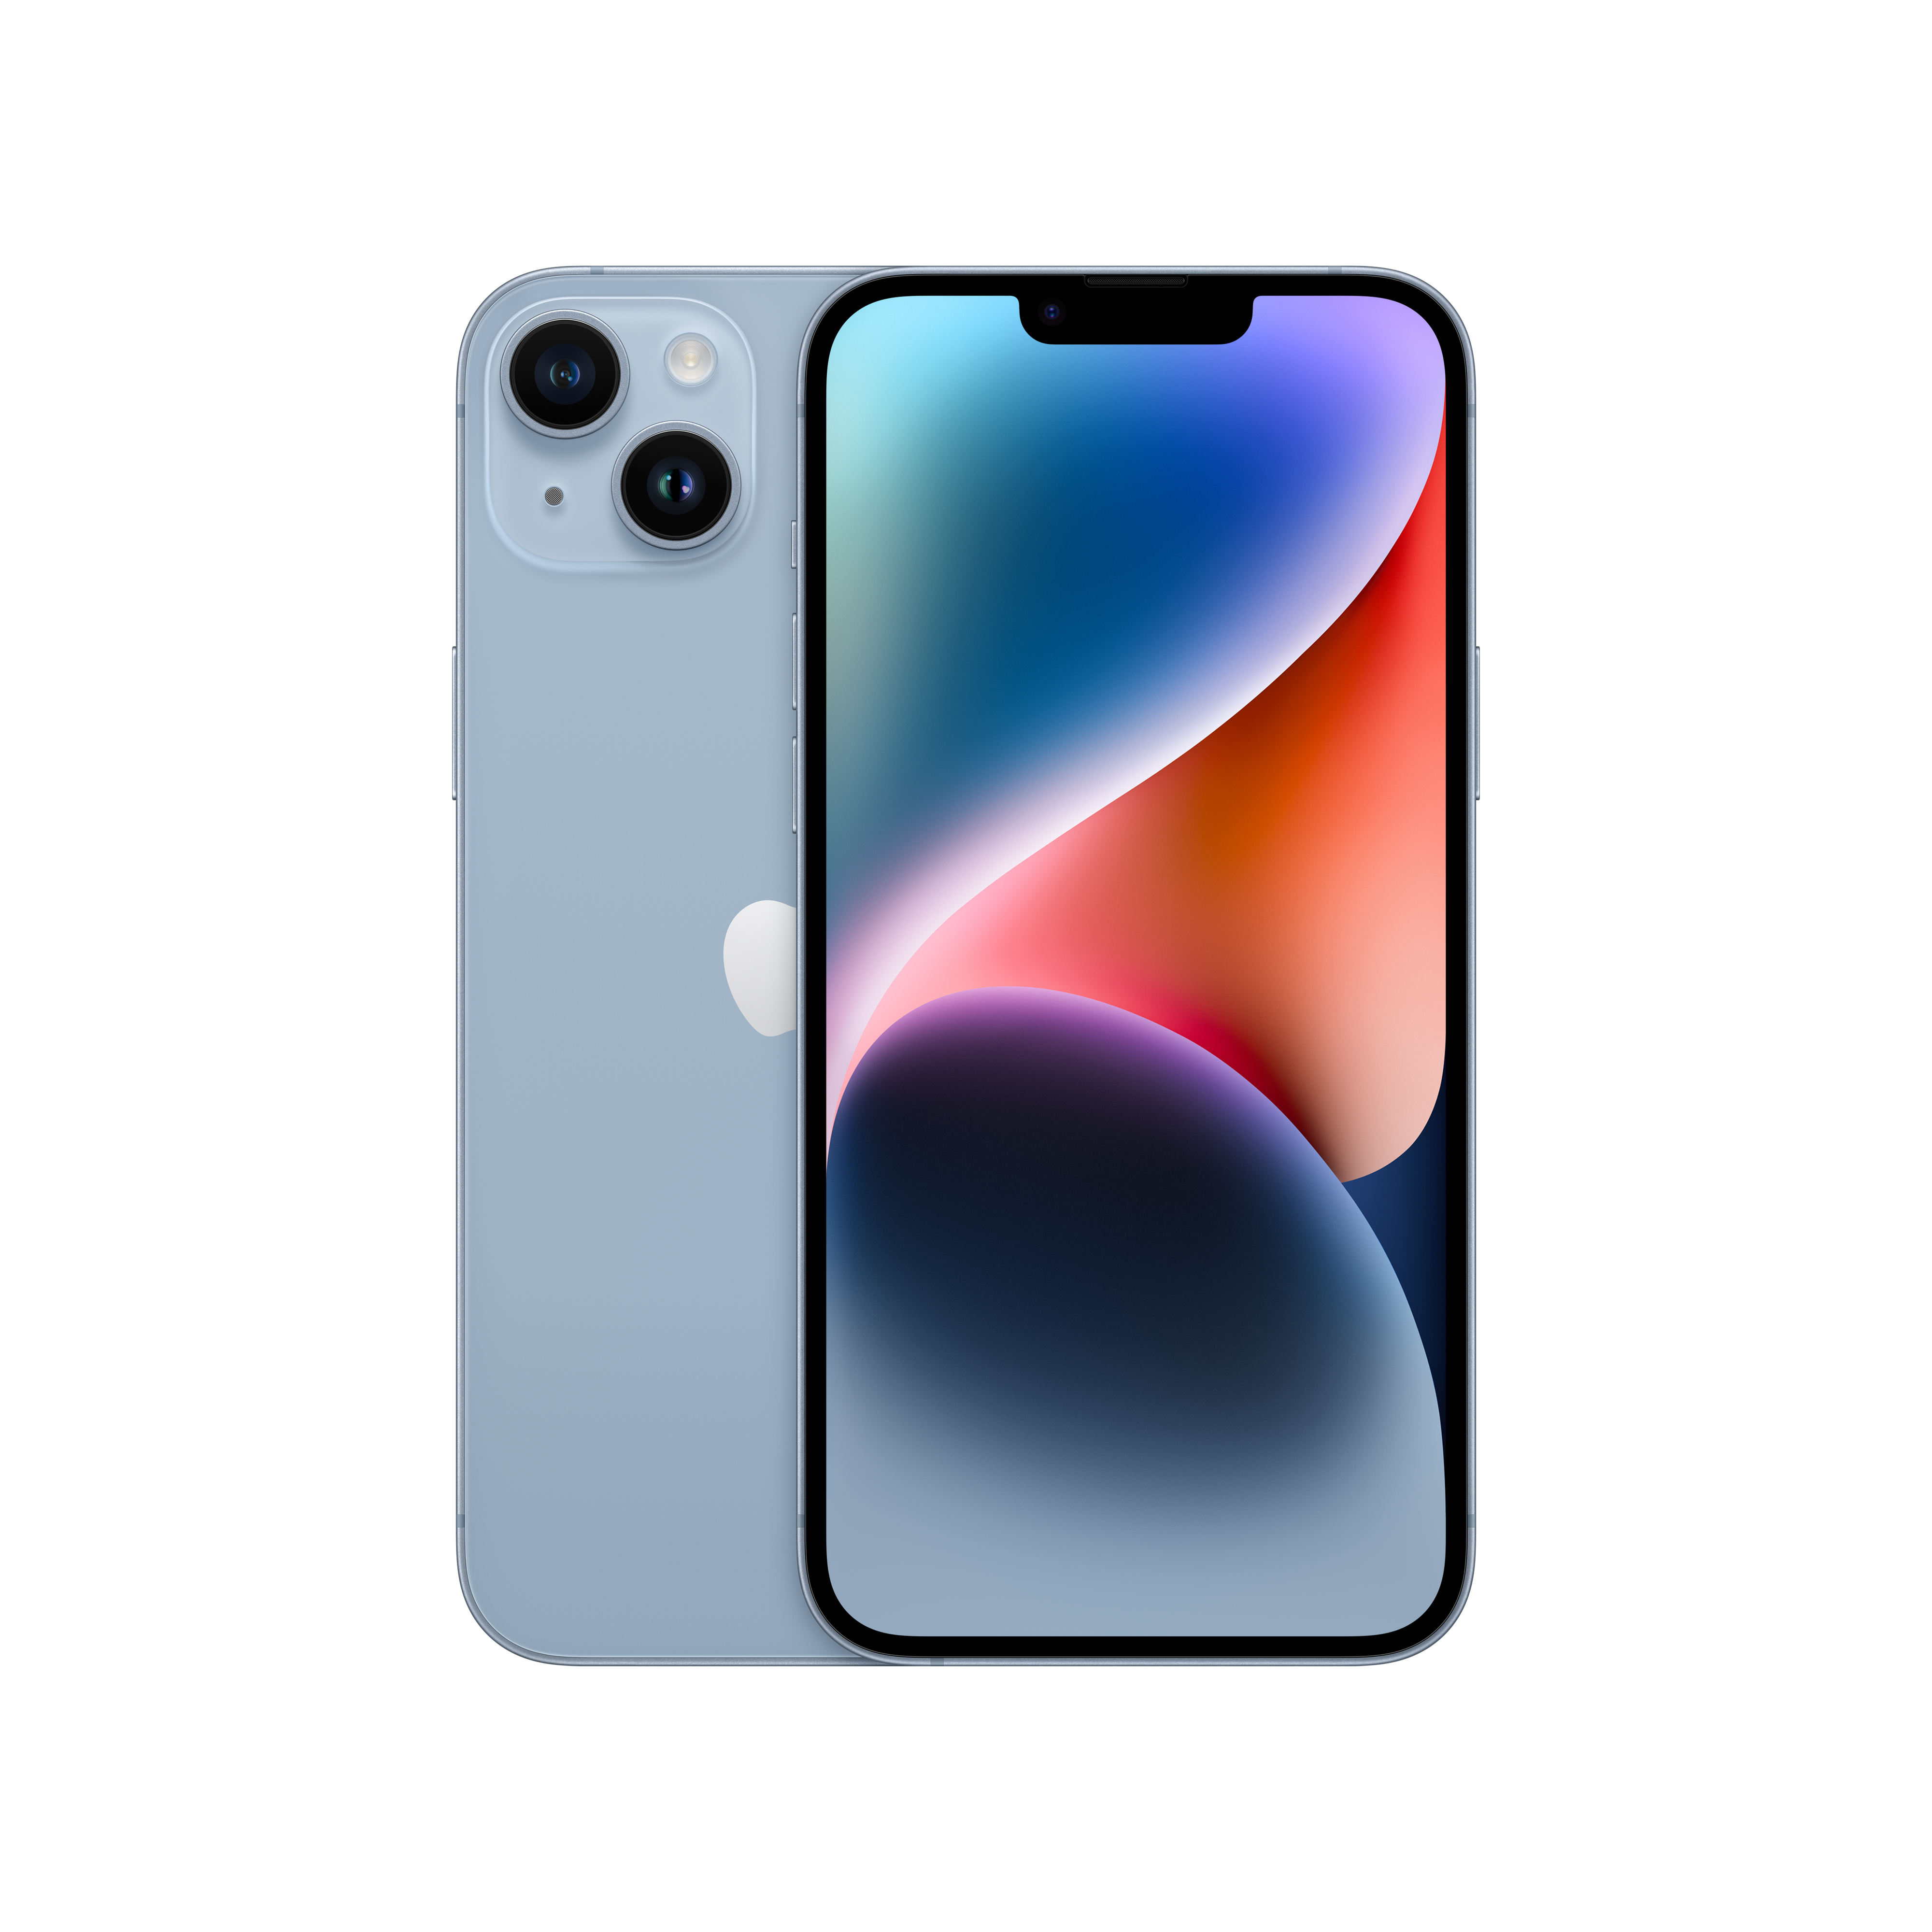 Apple iPhone 14 plus (MQ5G3HN/A) Blue with 512GB , iOS 16, A15 Bionic chip, 6core CPU with 2 performance, 6.7 inch OLED display